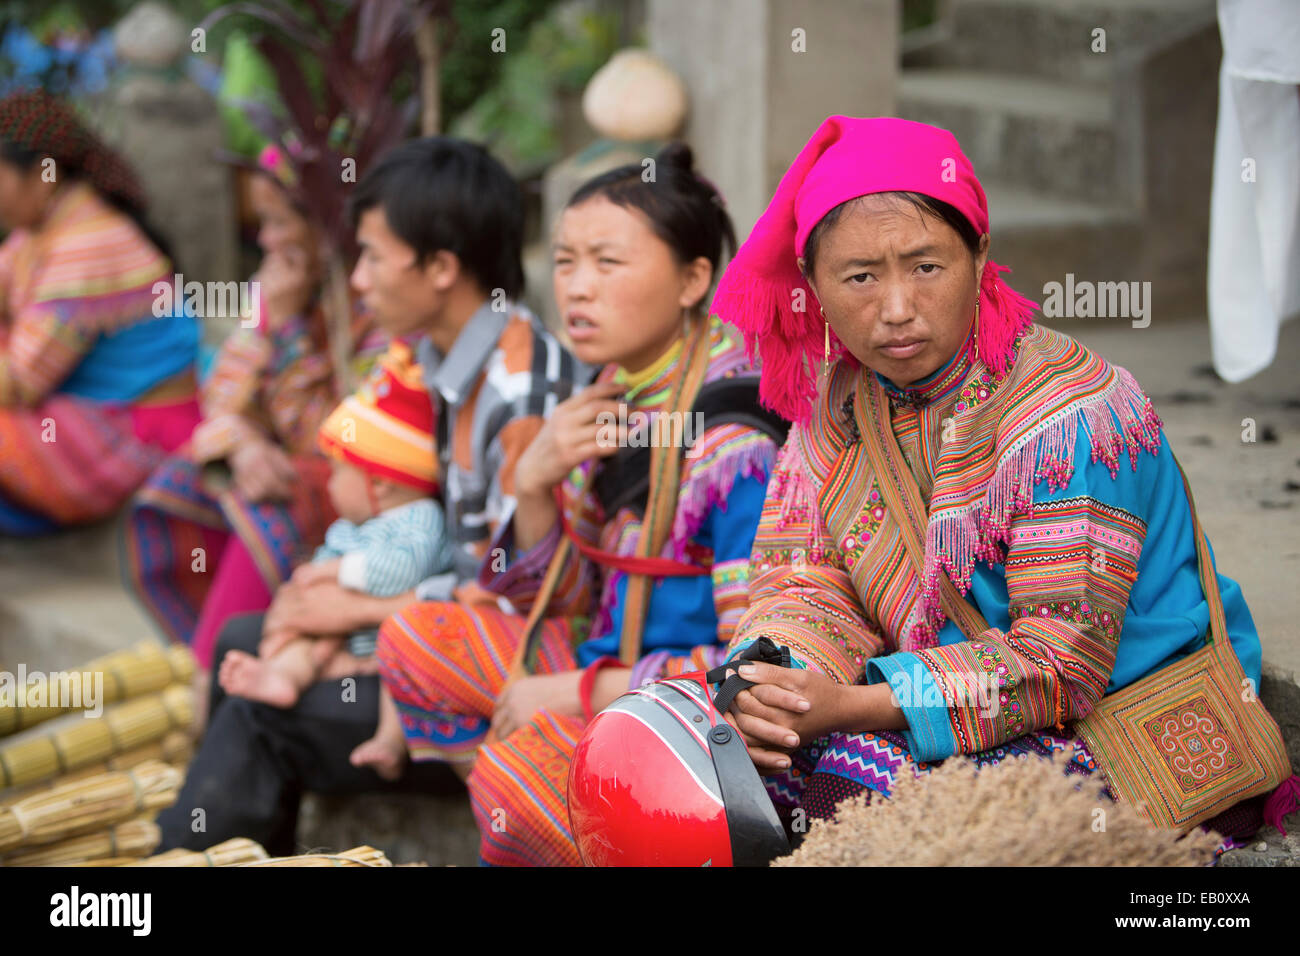 Flower Hmong women selling incense at BacHa market in Vietnam Stock Photo